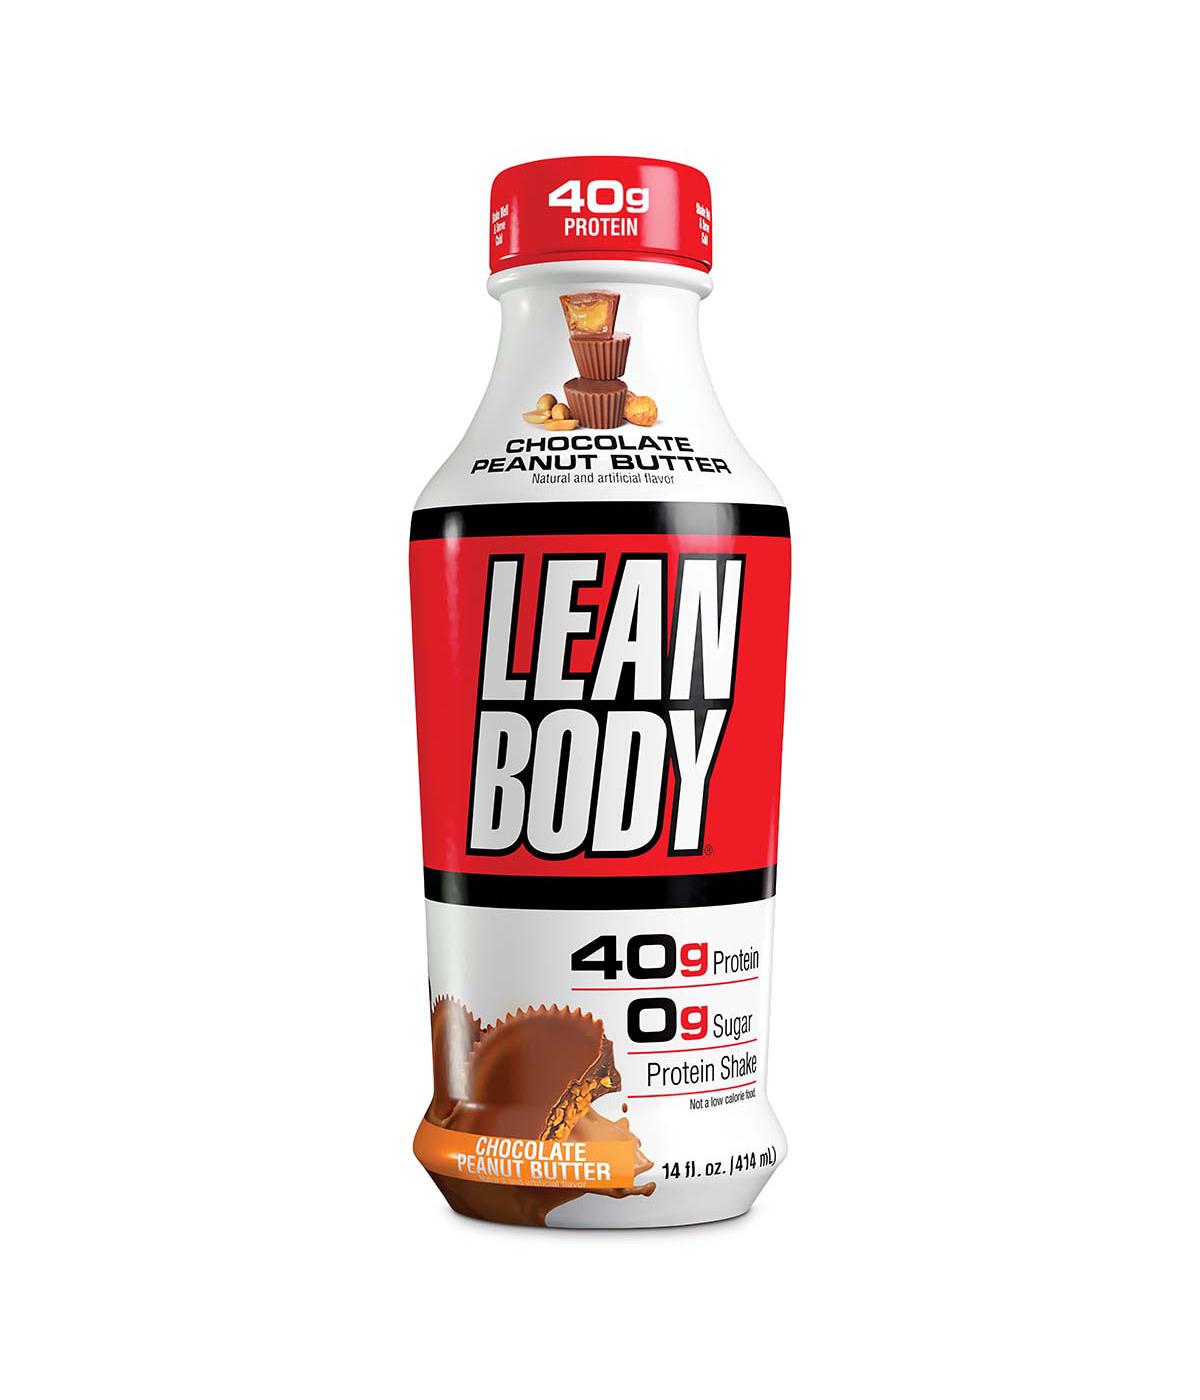 Lean Body 40G Protein Shake - Chocolate Peanut Butter; image 1 of 3